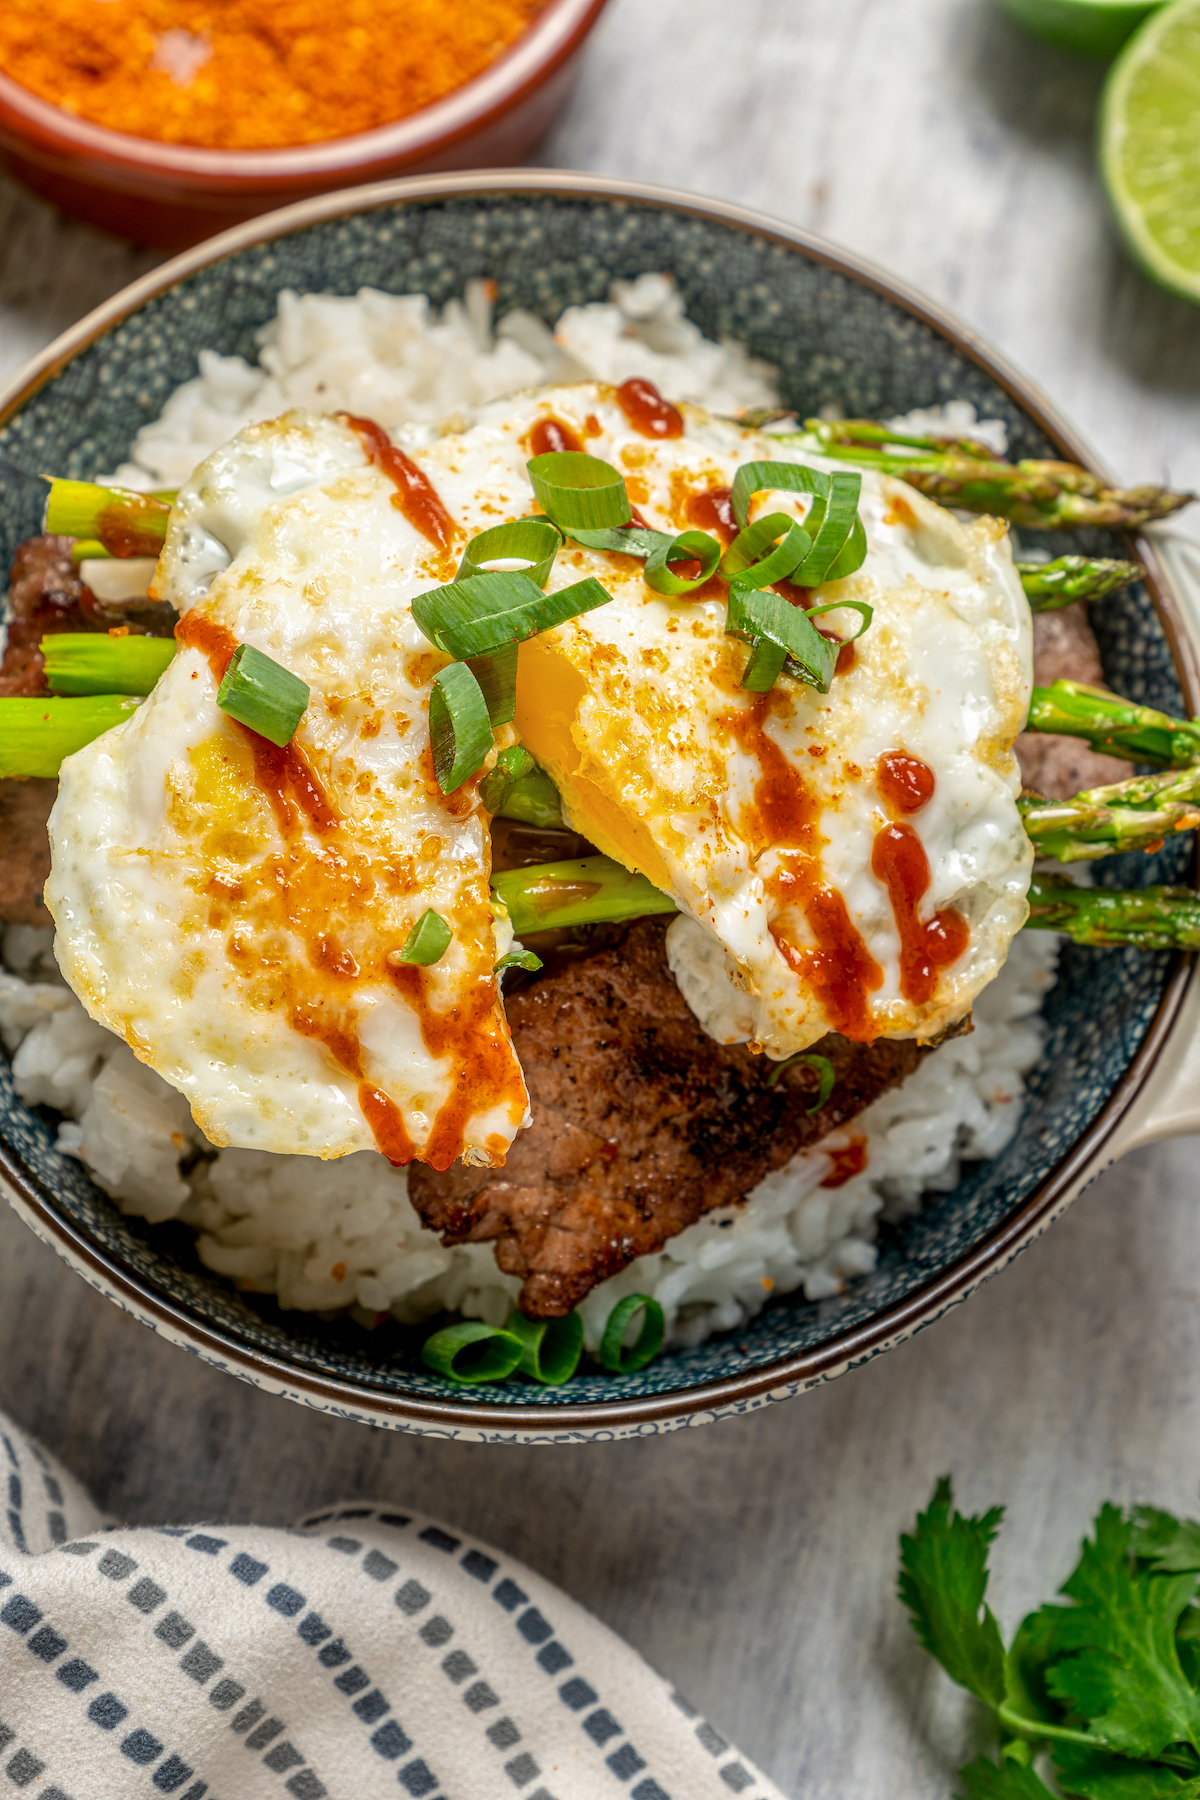 A fried egg, cut in half, on top of a rice bowl with steak.